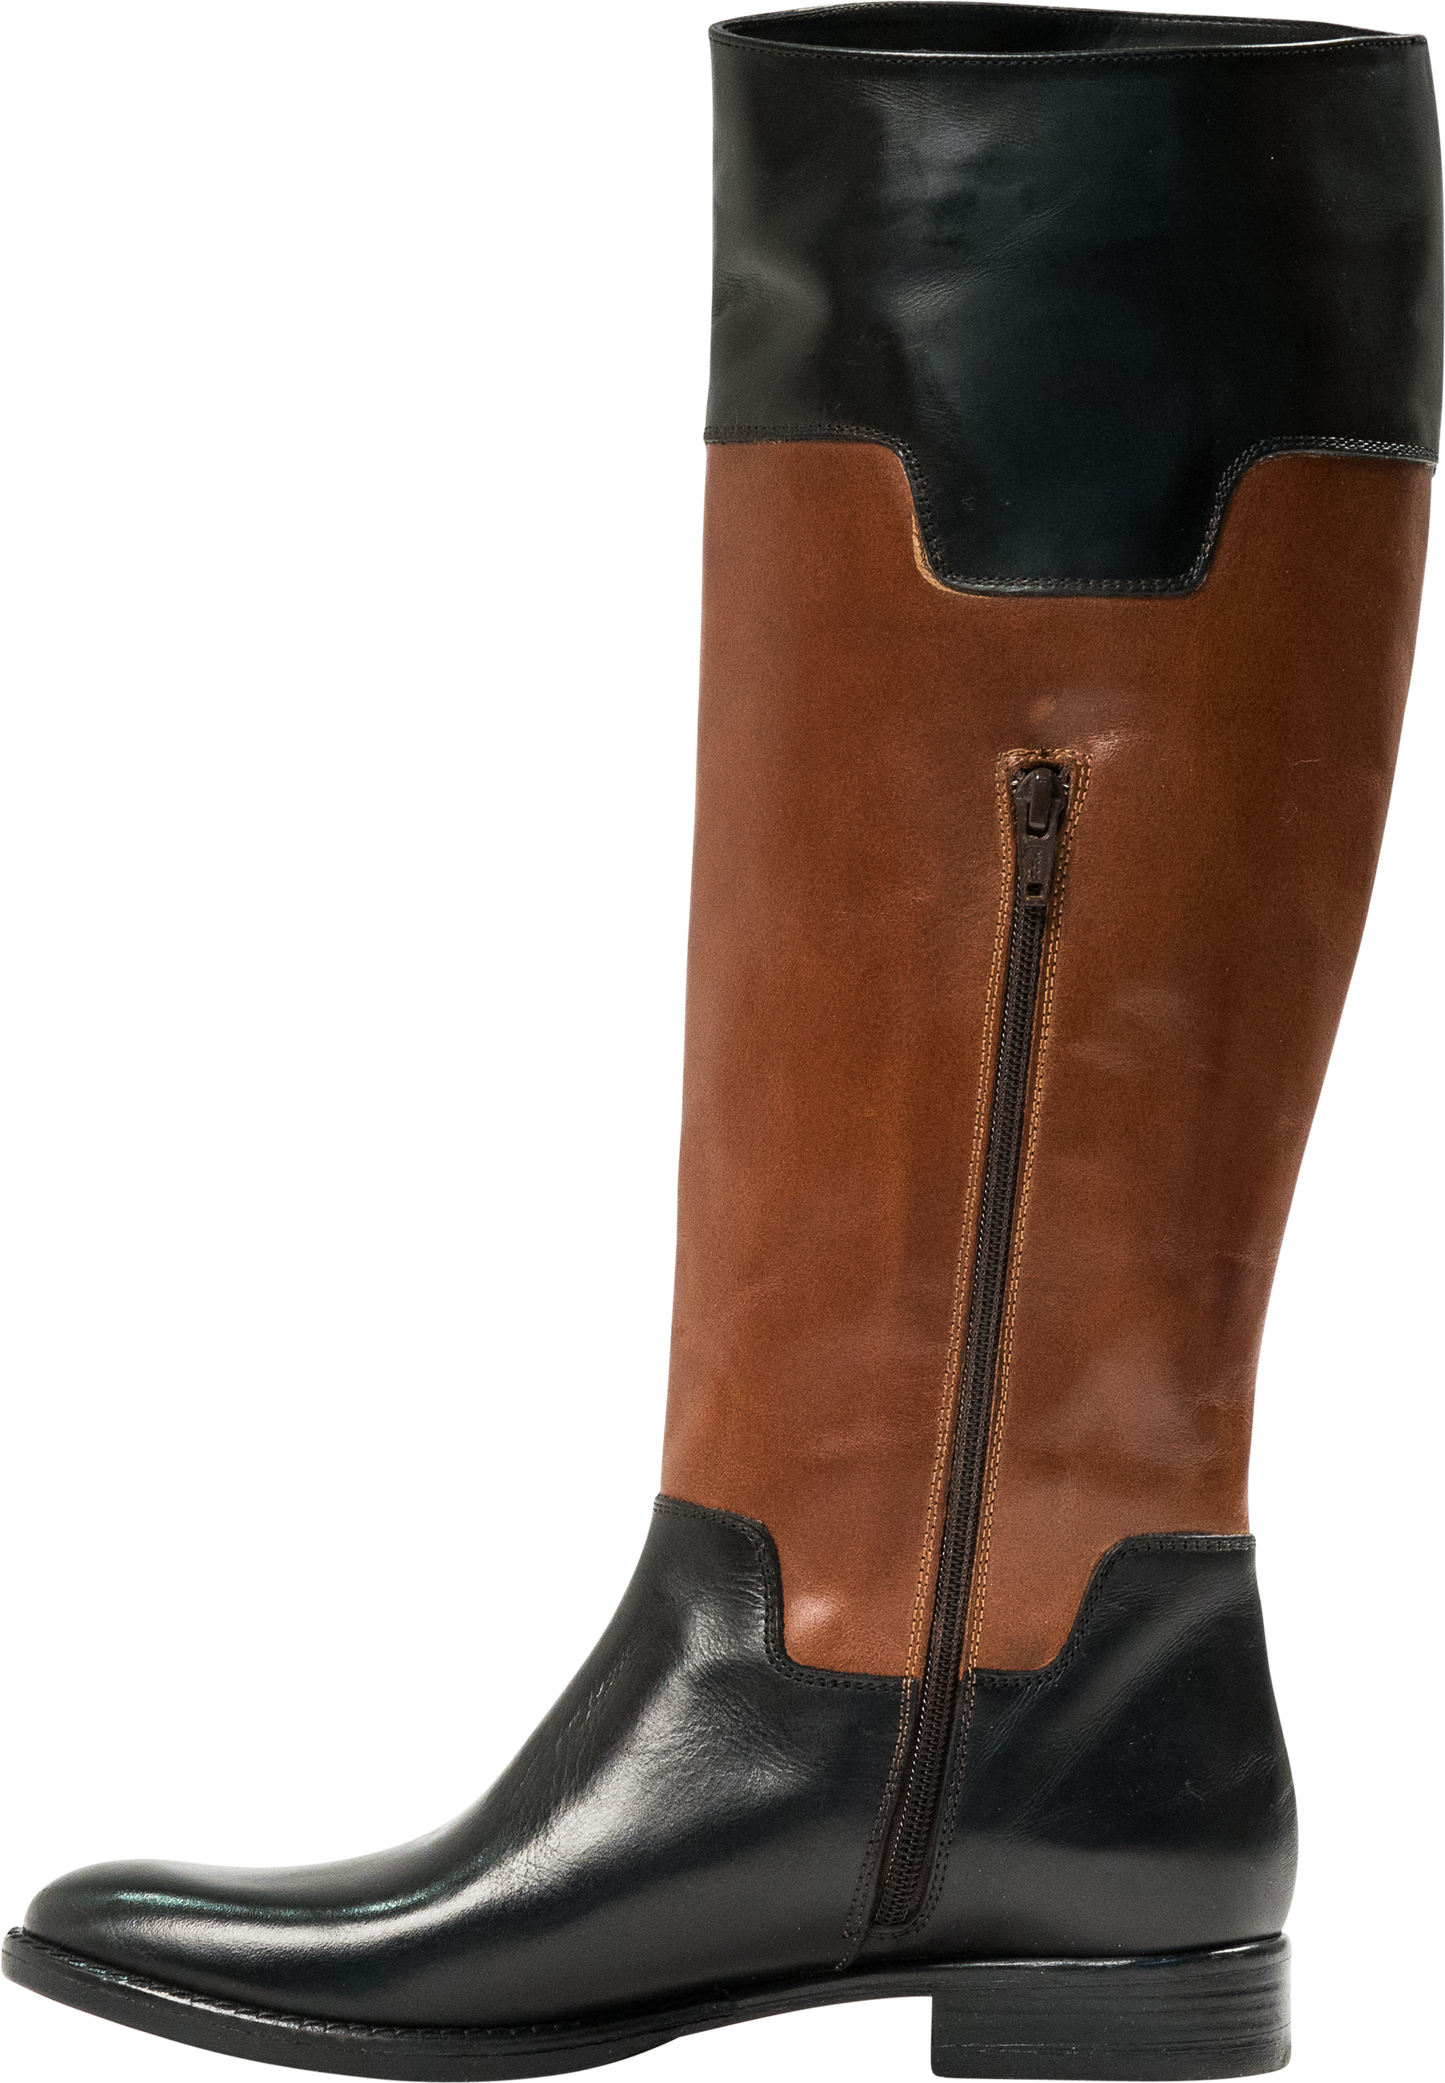 Lori Black and Brown Nappa Leather Tall Riding Boots